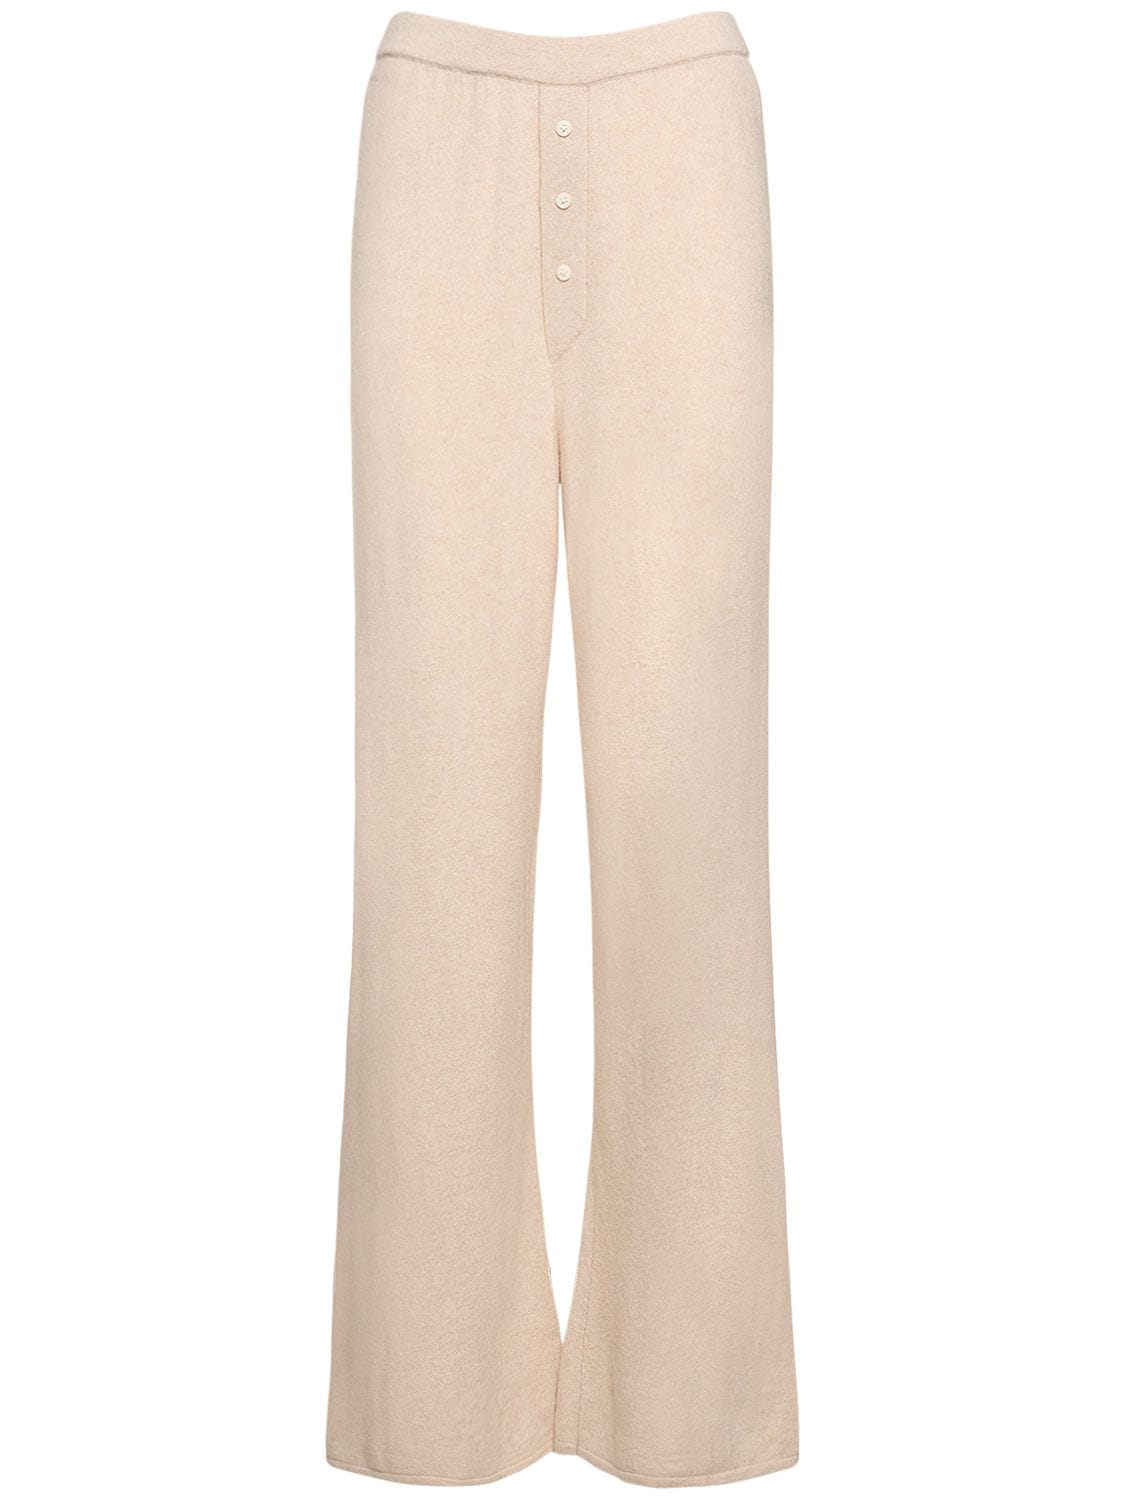 Guest In Residence Everywear Cashmere Knitted Pants In Beige